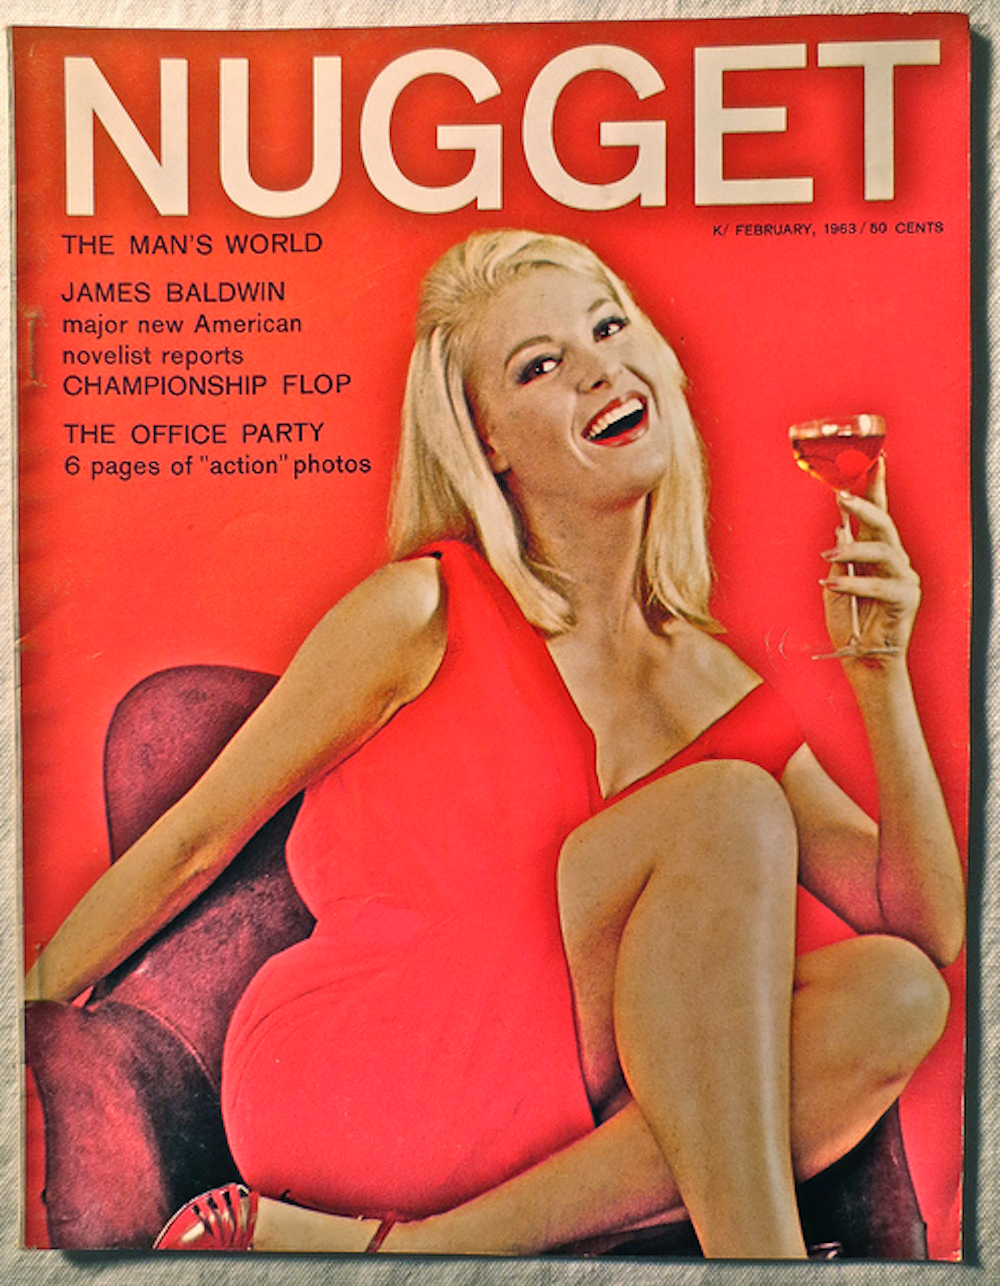 Open Nudist Lifestyle - How Playboy skirted the anti-porn crusade of the 1950s